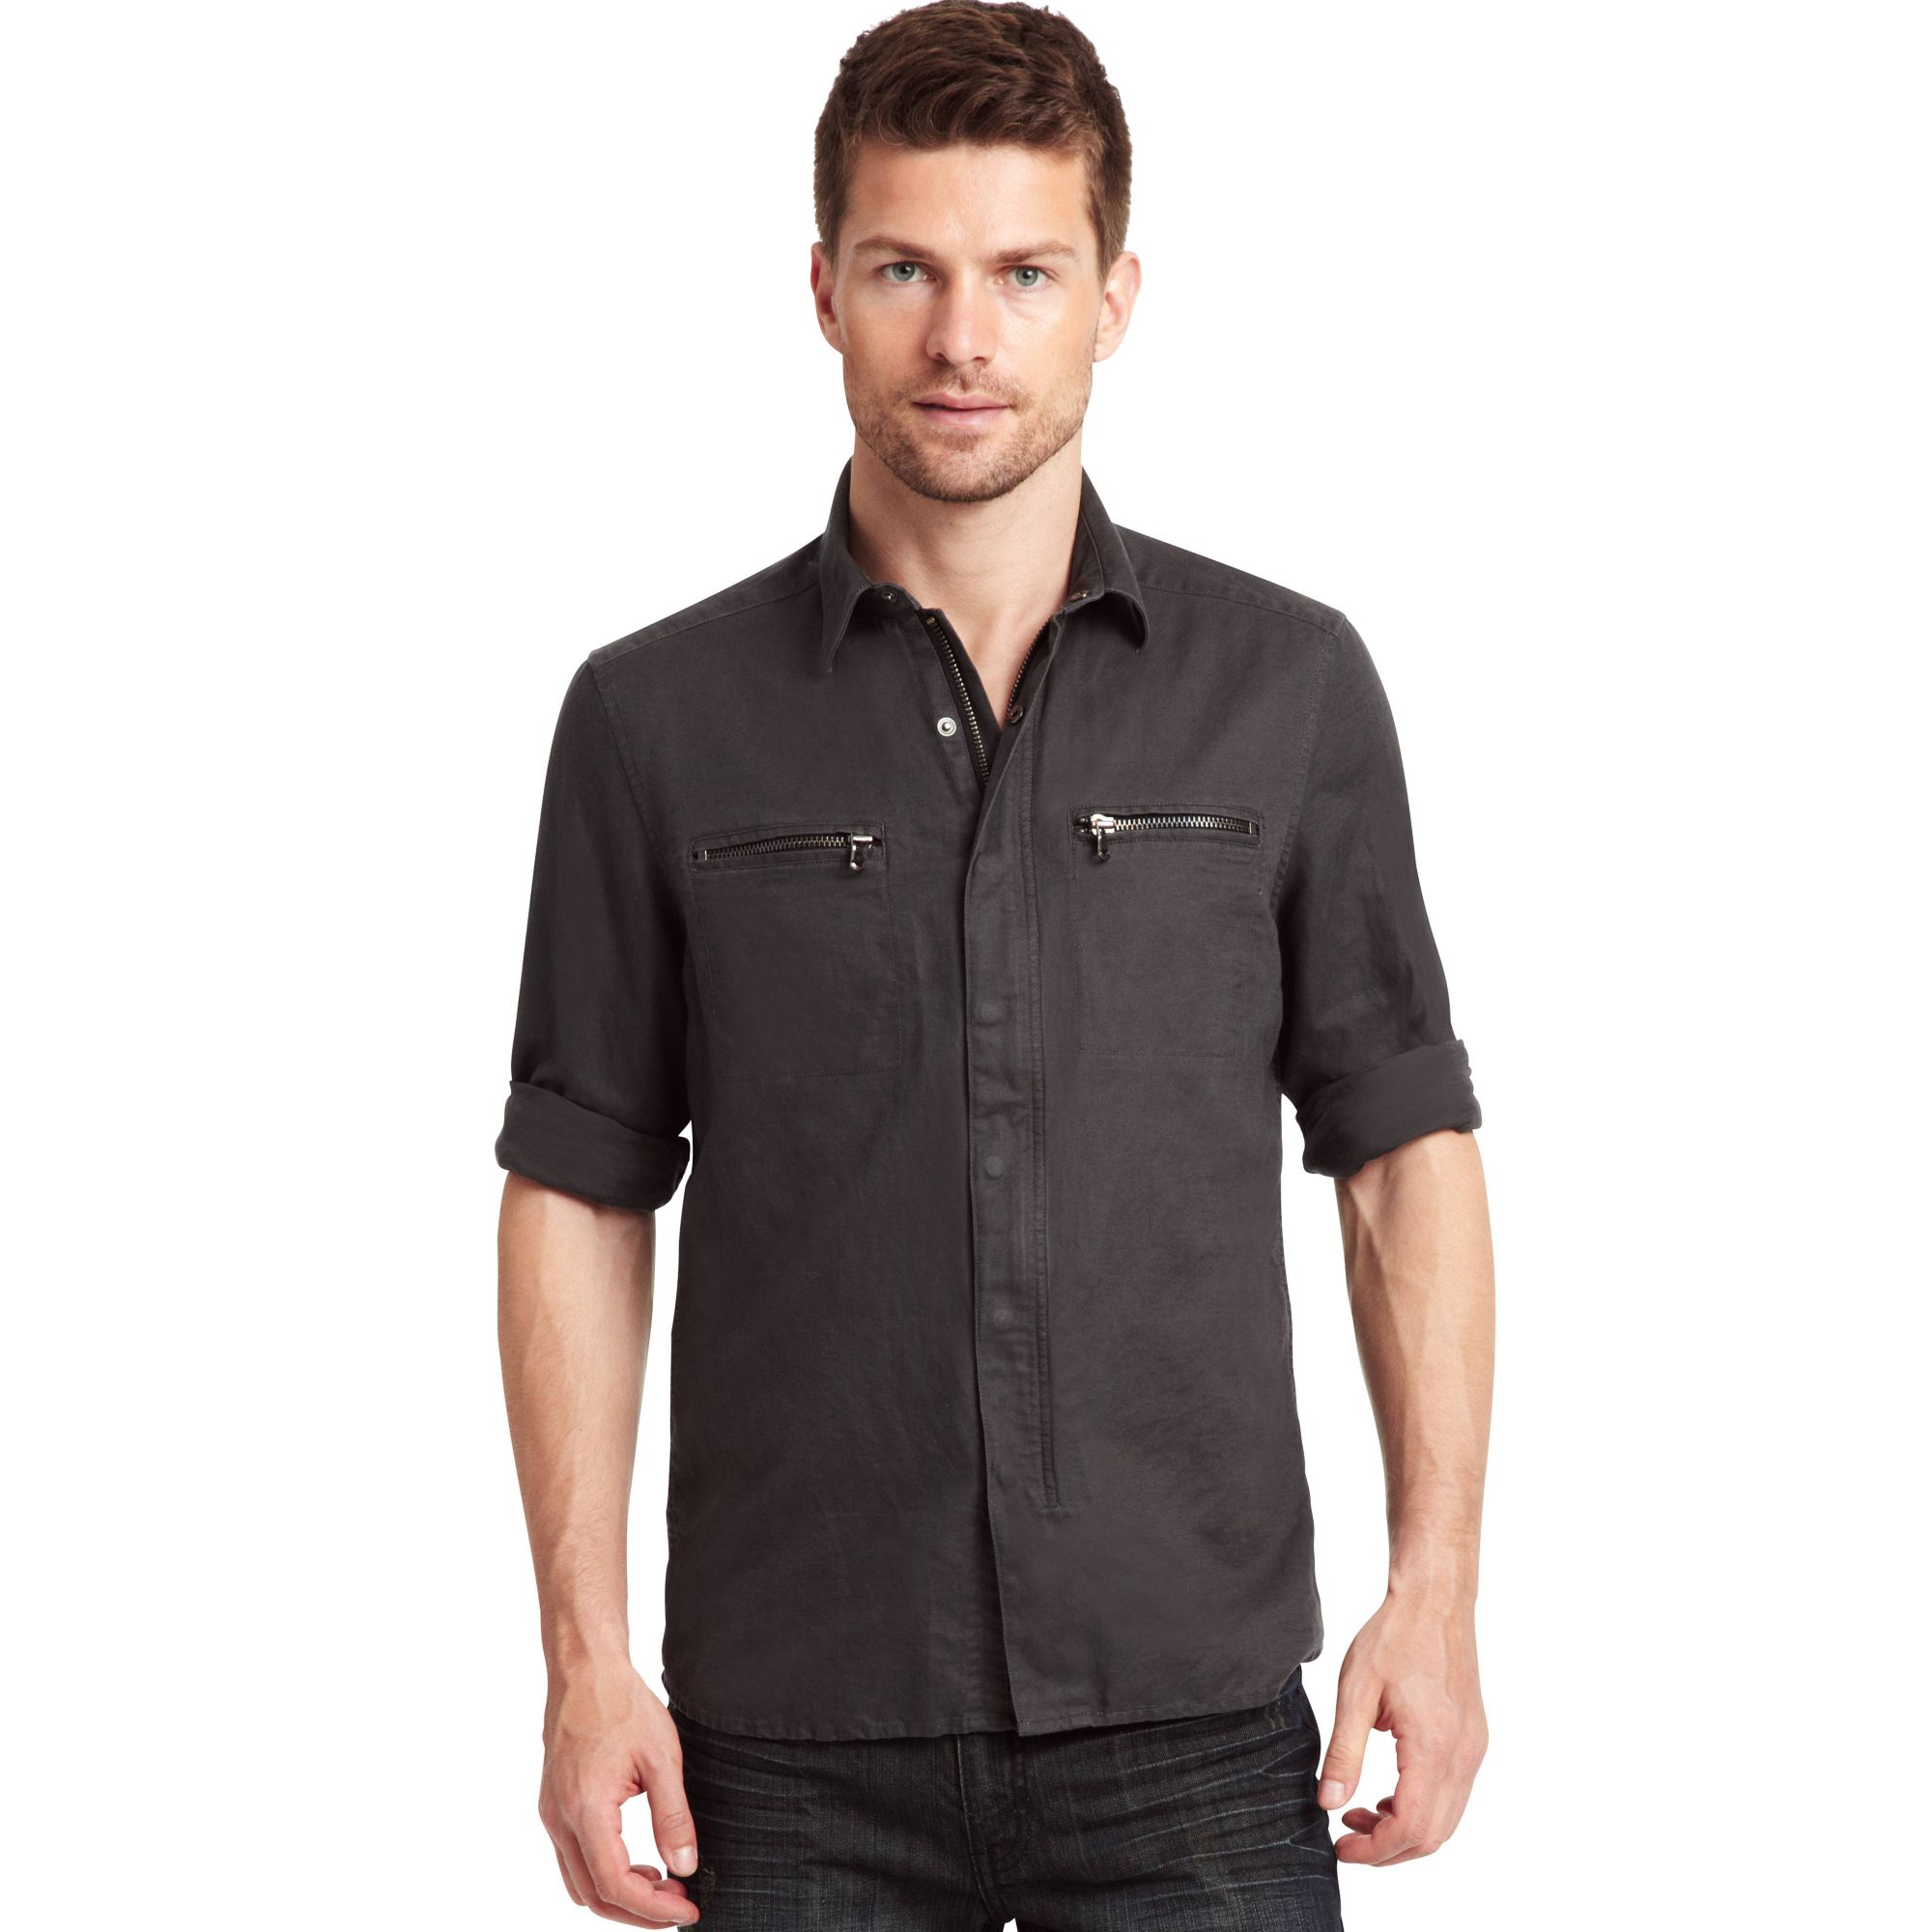 Lyst - Kenneth Cole Long Sleeve Zip Up Shirt in Black for Men